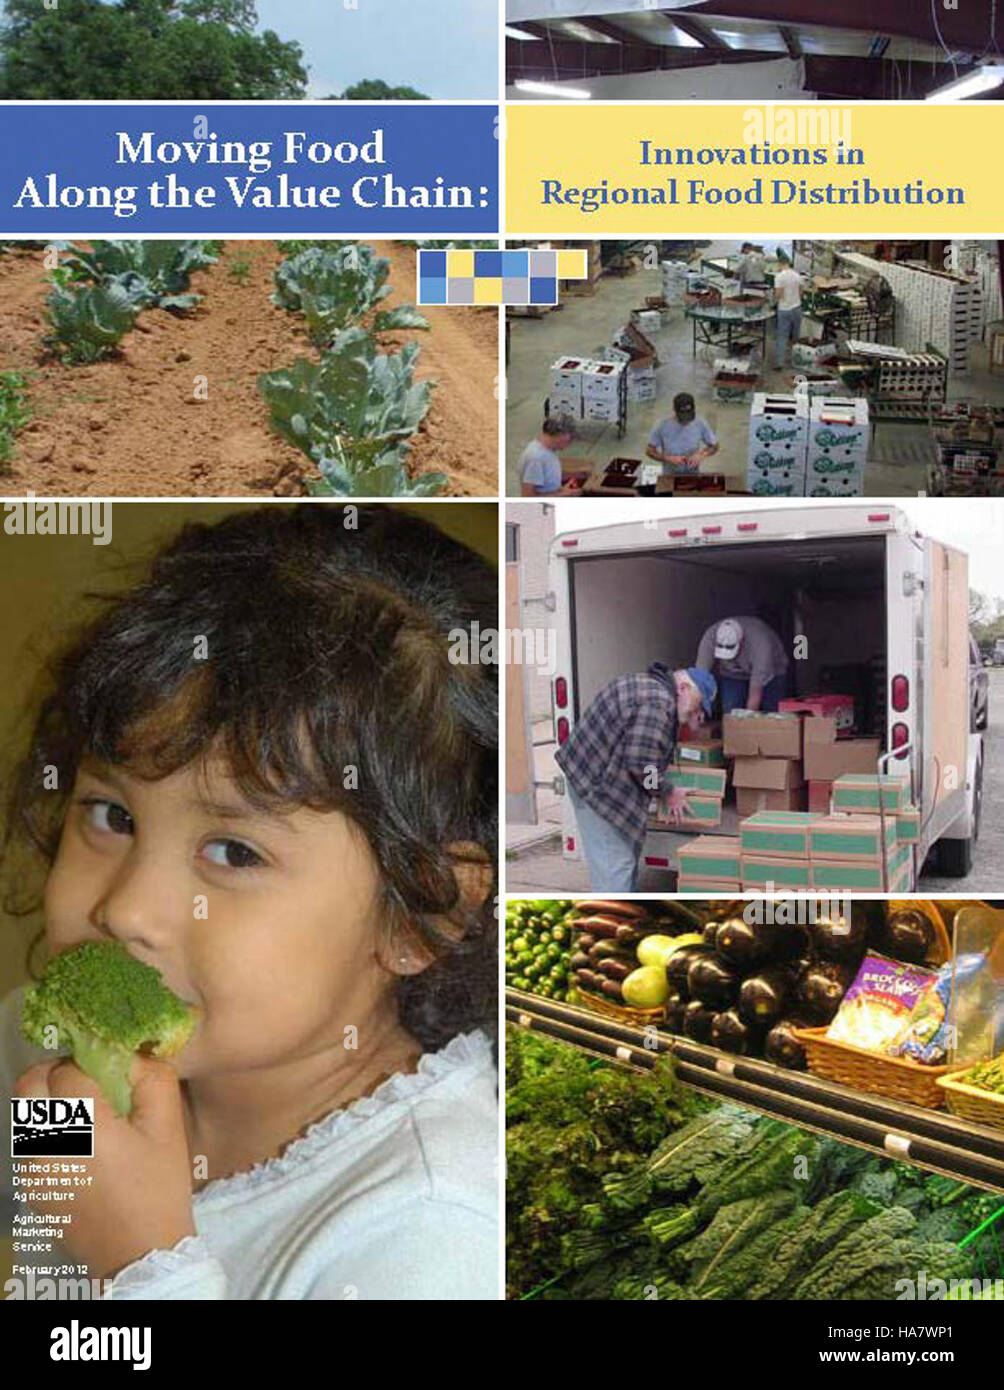 usdagov 6841634814 Moving Food Along the Value Chain Innovations in Regional Food Distribution Page 01 Stock Photo